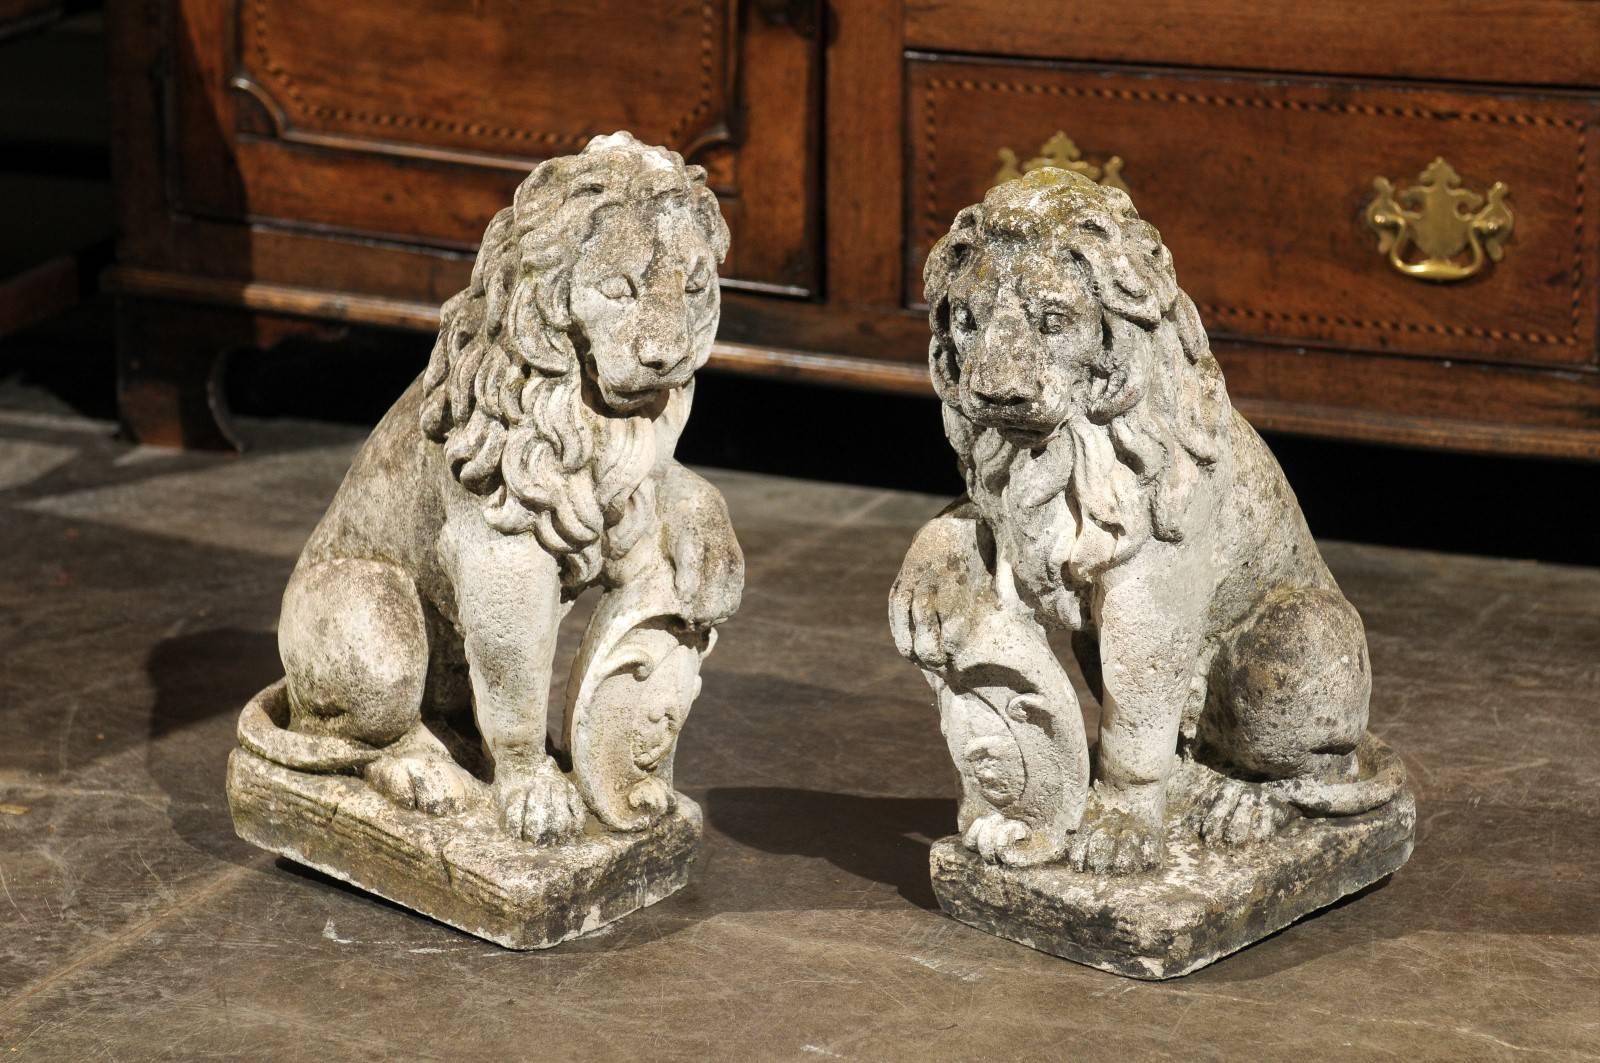 A pair of French vintage small size seated lions. This pair of French lions from circa 1960 is made of light colored reconstituted stone with aging and features two lions seated in the traditional pose, with one paw on a shield. The pair is raised